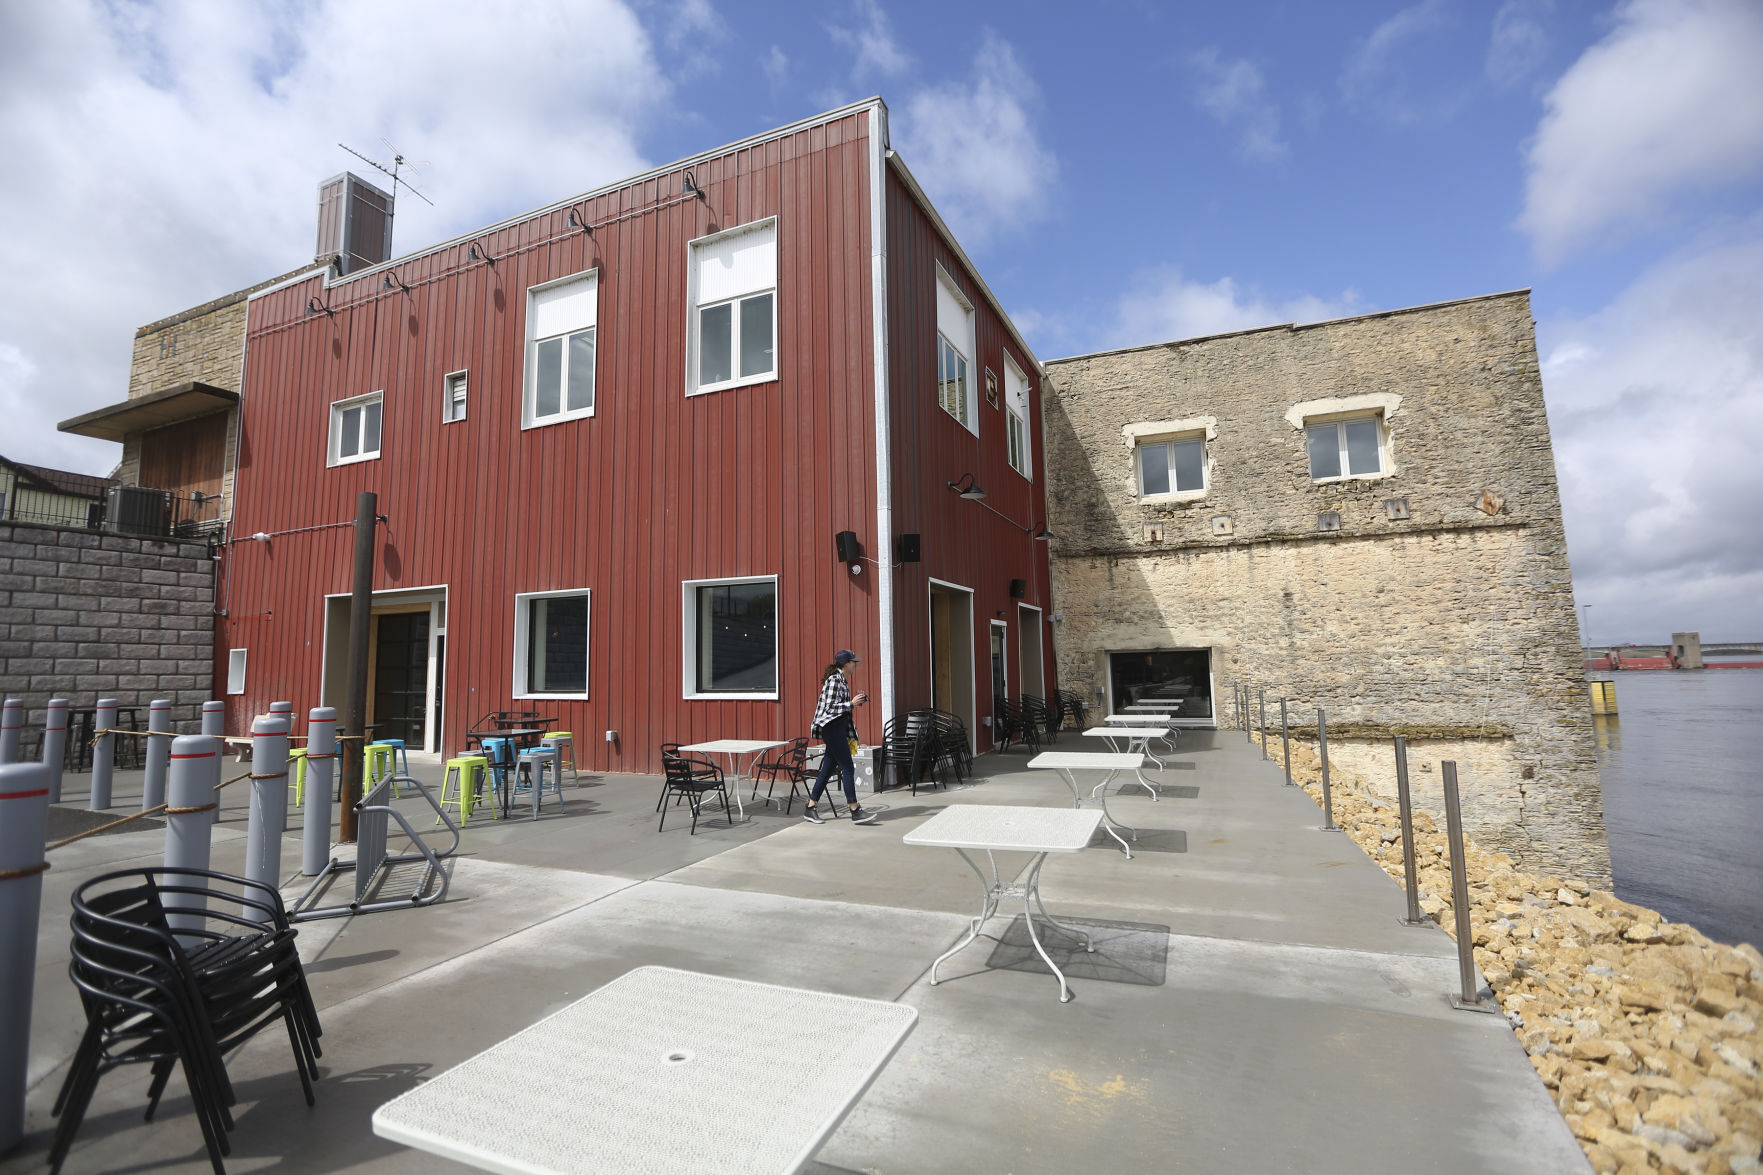 River Ridge Brewing opened its new location along the Mississippi River in Bellevue, Iowa, on Friday, April 9, 2021. PHOTO CREDIT: Dave Kettering